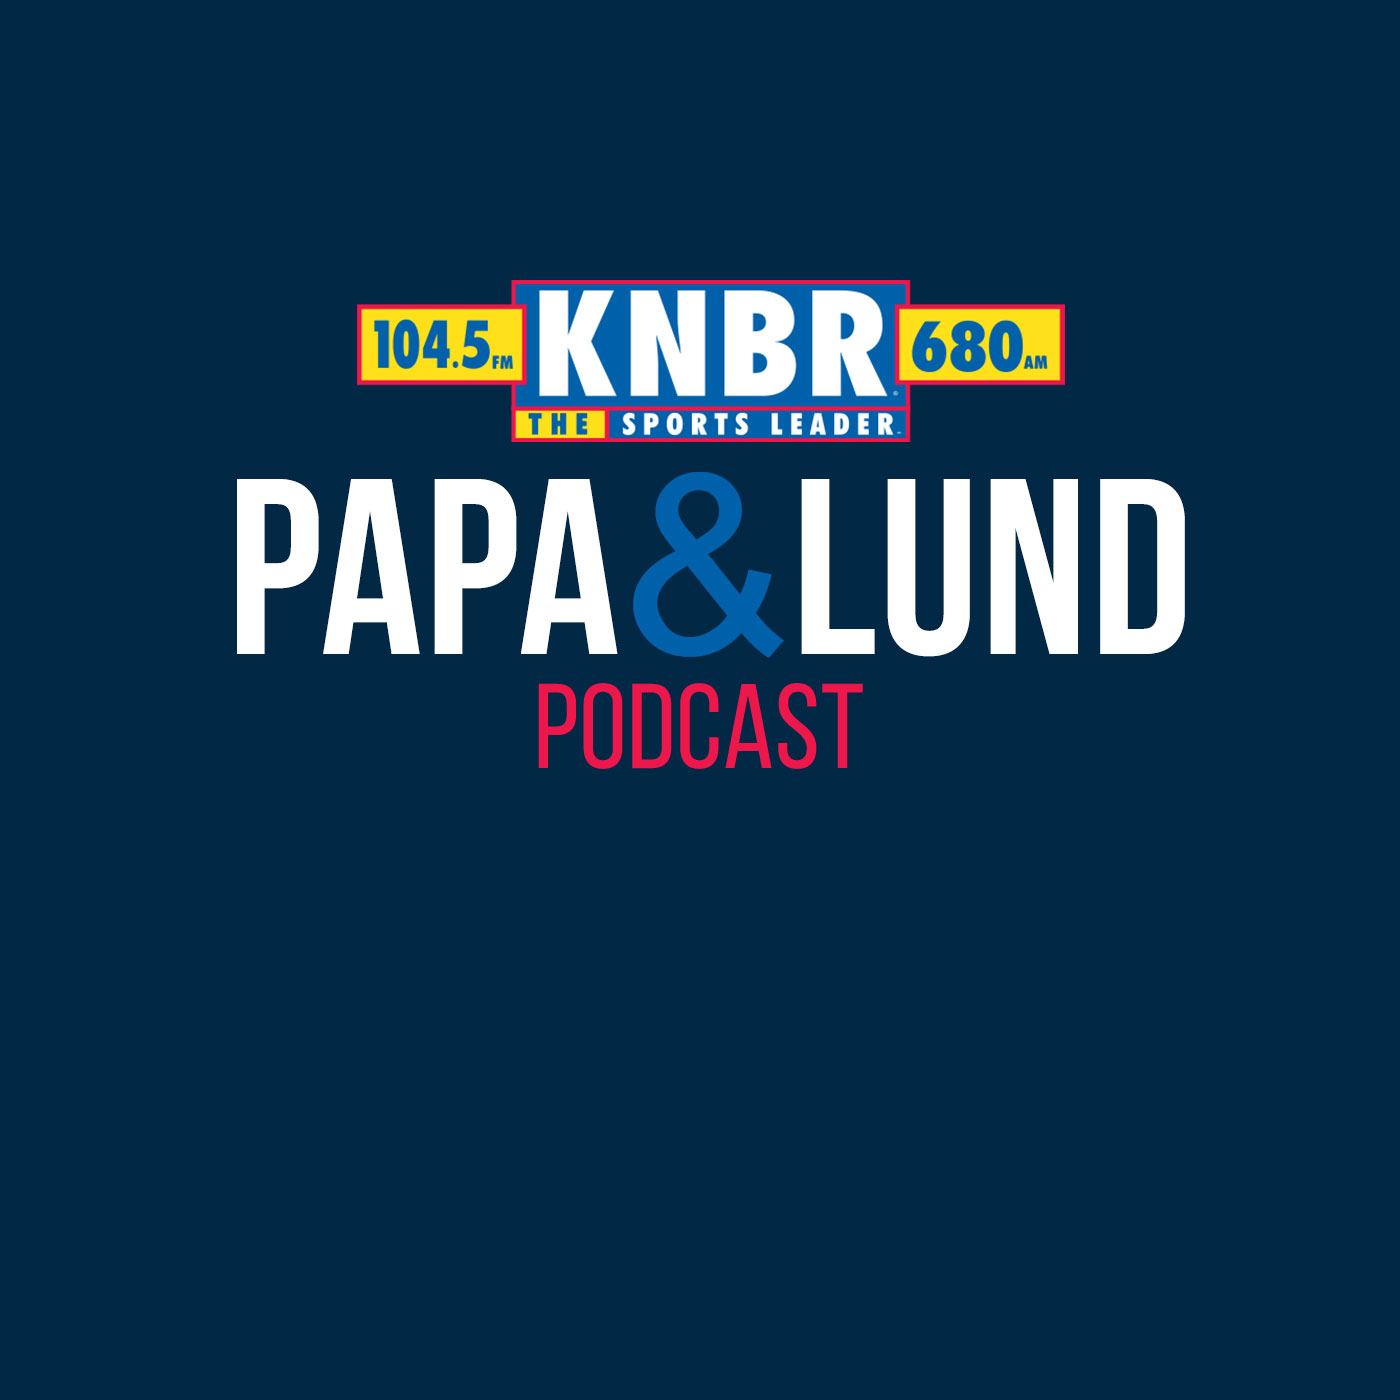 6-27 Shawn Estes joins Papa & Lund to discuss how the Giants stack up against the rest of the NL West as well as how it feels facing against your former teammates as the Giants see Brandon Belt for the first time since leaving the Giants